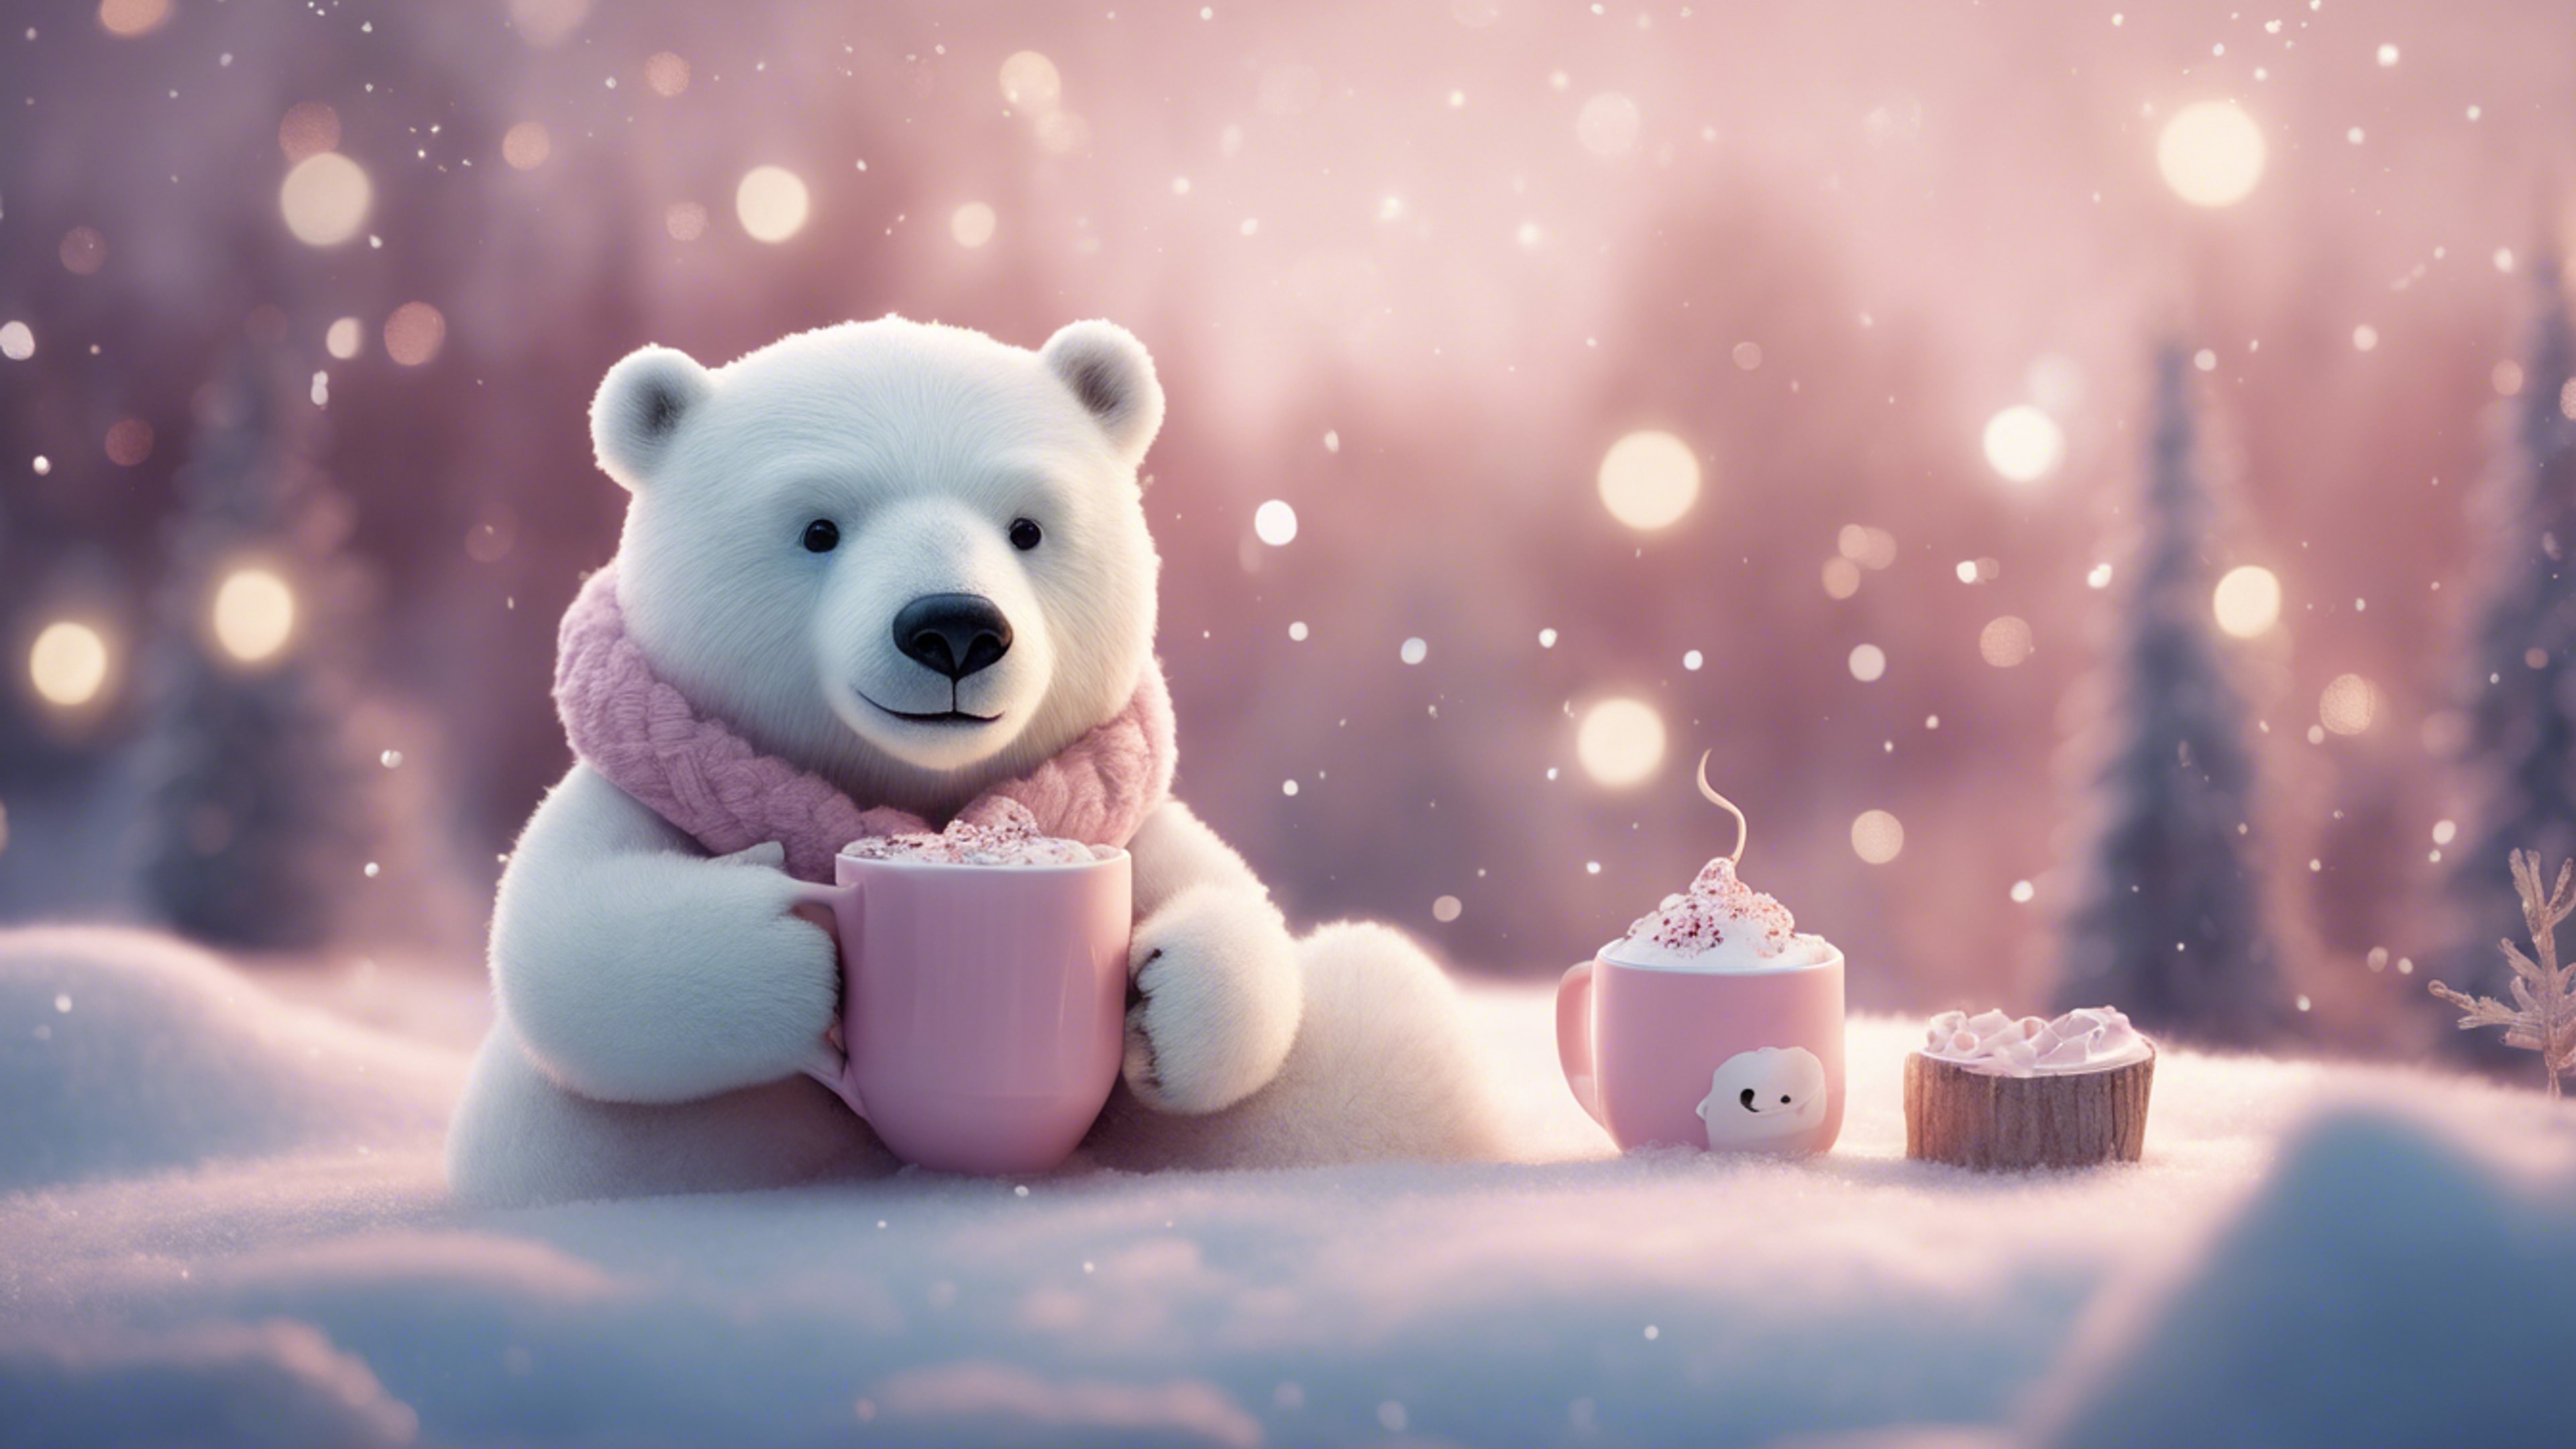 A whimsical pastel winter landscape with a lovely moonlight night featuring a kawaii-inspired polar bear sipping hot chocolate. 벽지[2f0fc56546c54560a936]